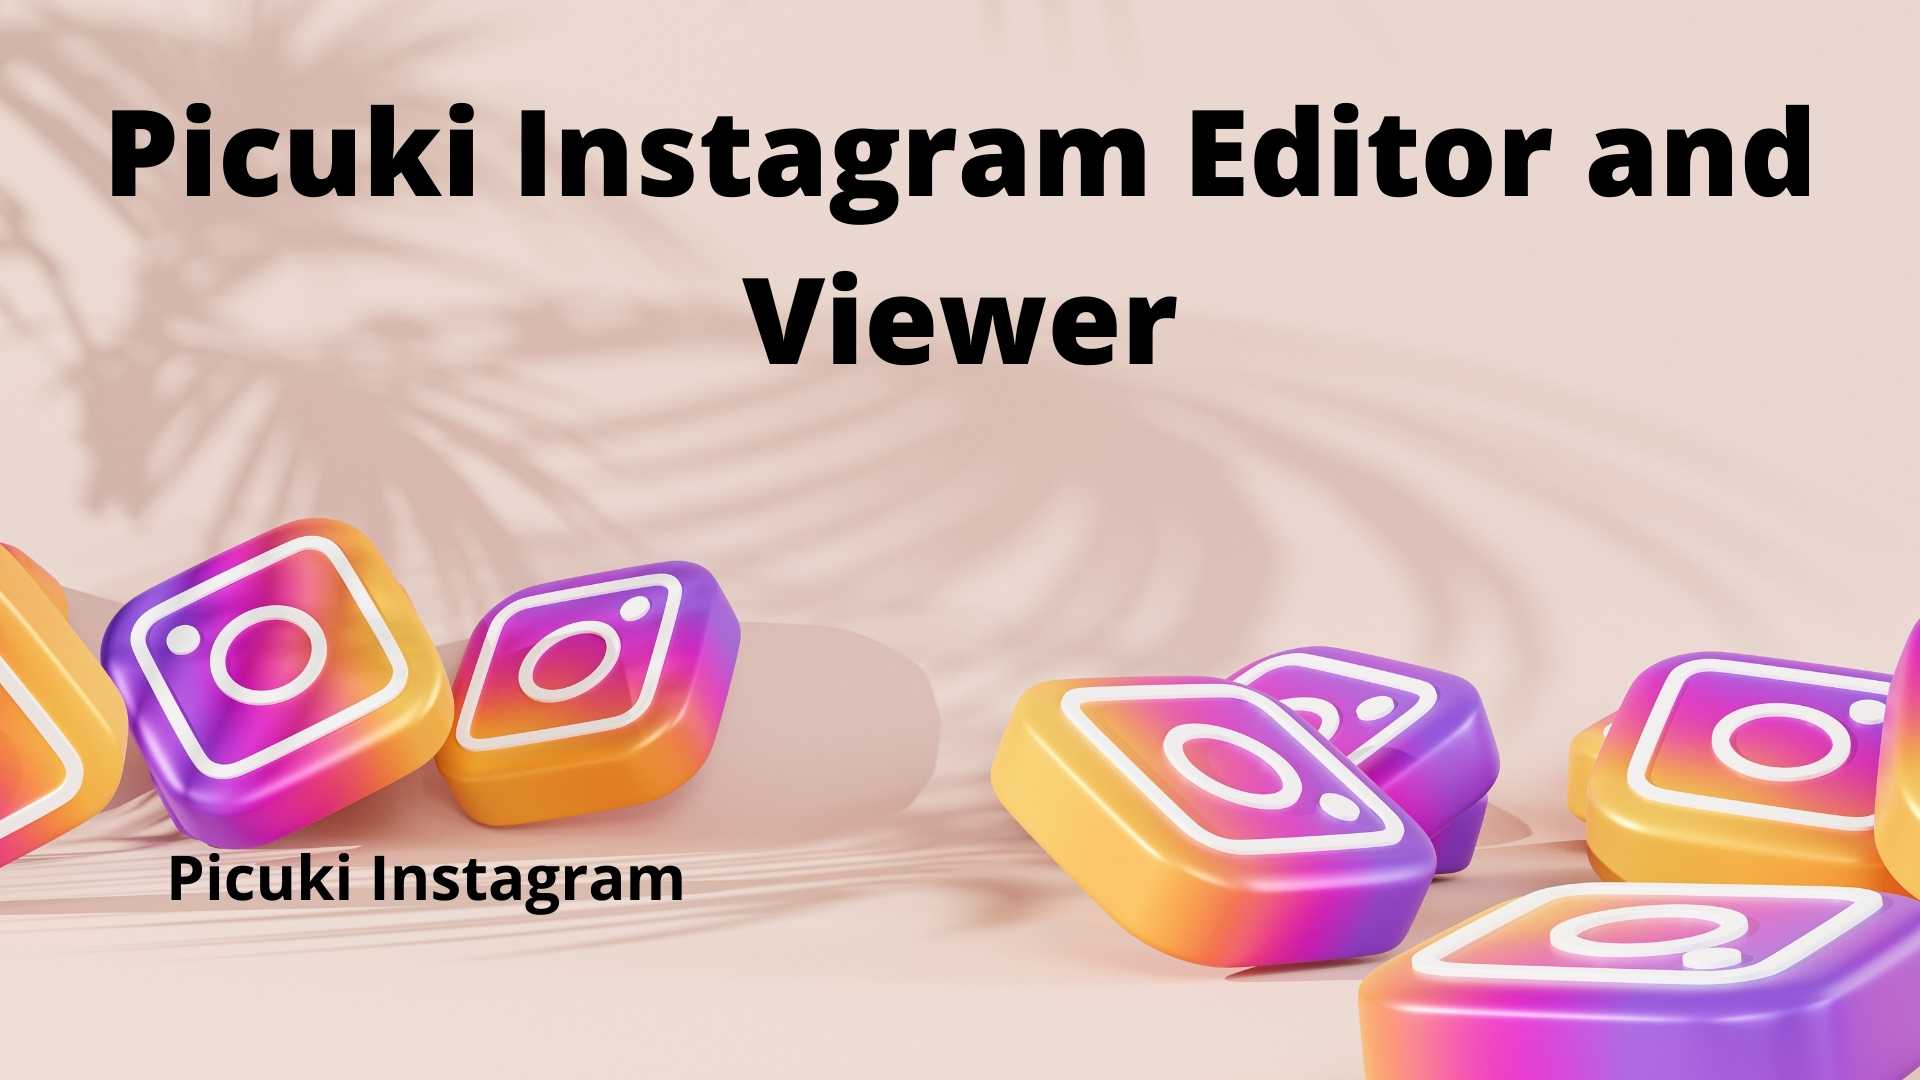 Picuki Instagram Editor and Viewer